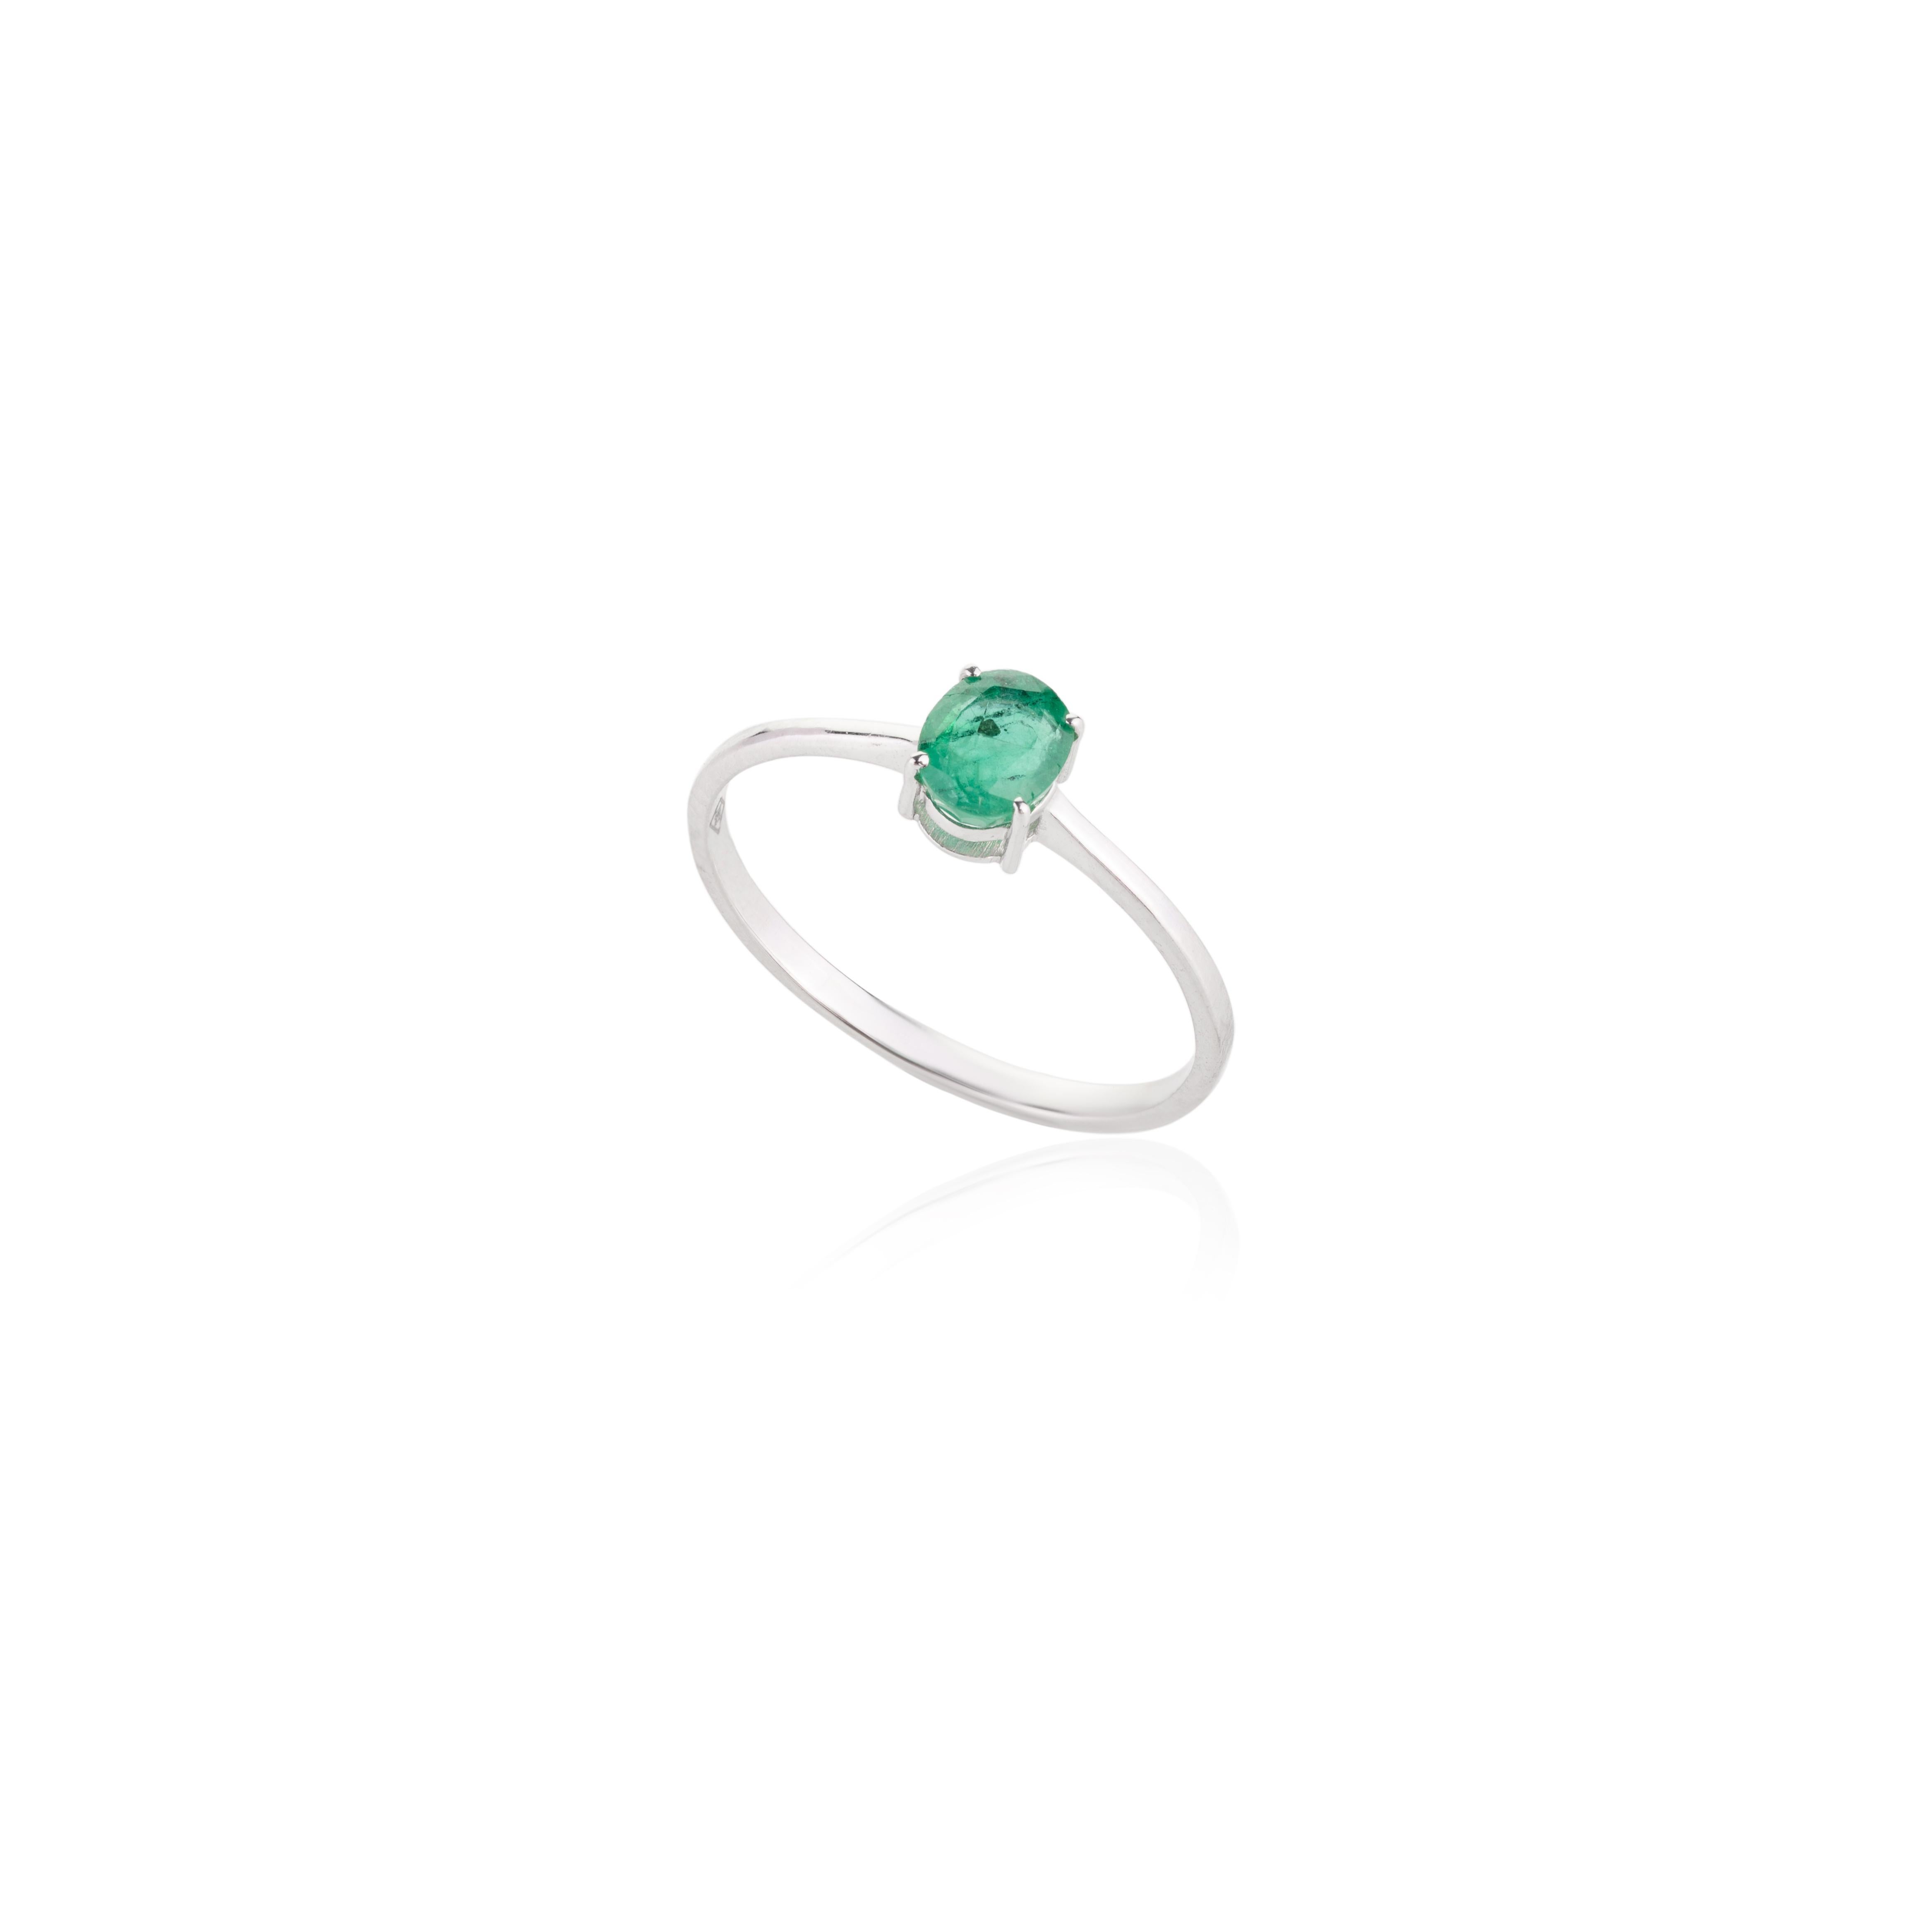 For Sale:  Handmade Natural Emerald Ring 18k Solid White Gold Minimalist Jewelry for Her 3